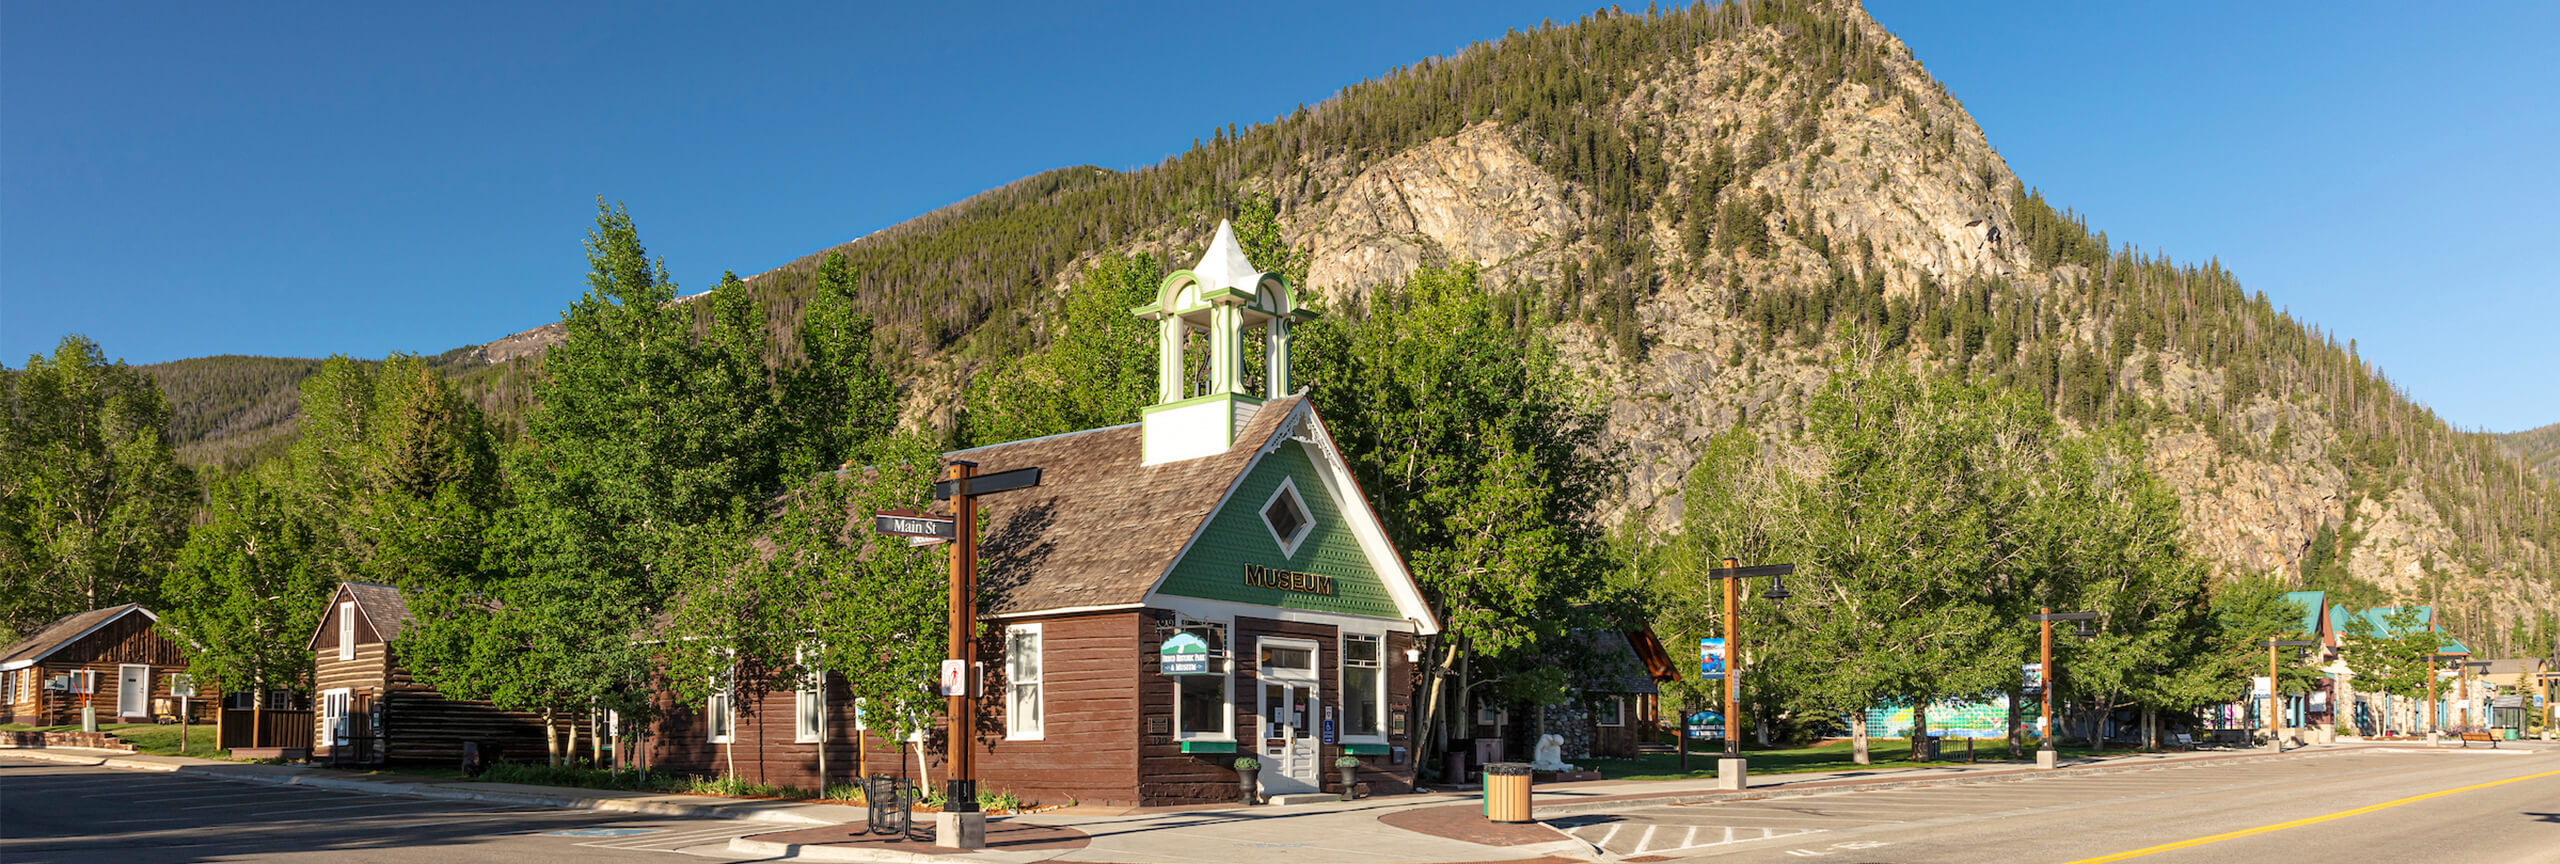 Frisco Main Street and Schoolhouse Museum in spring